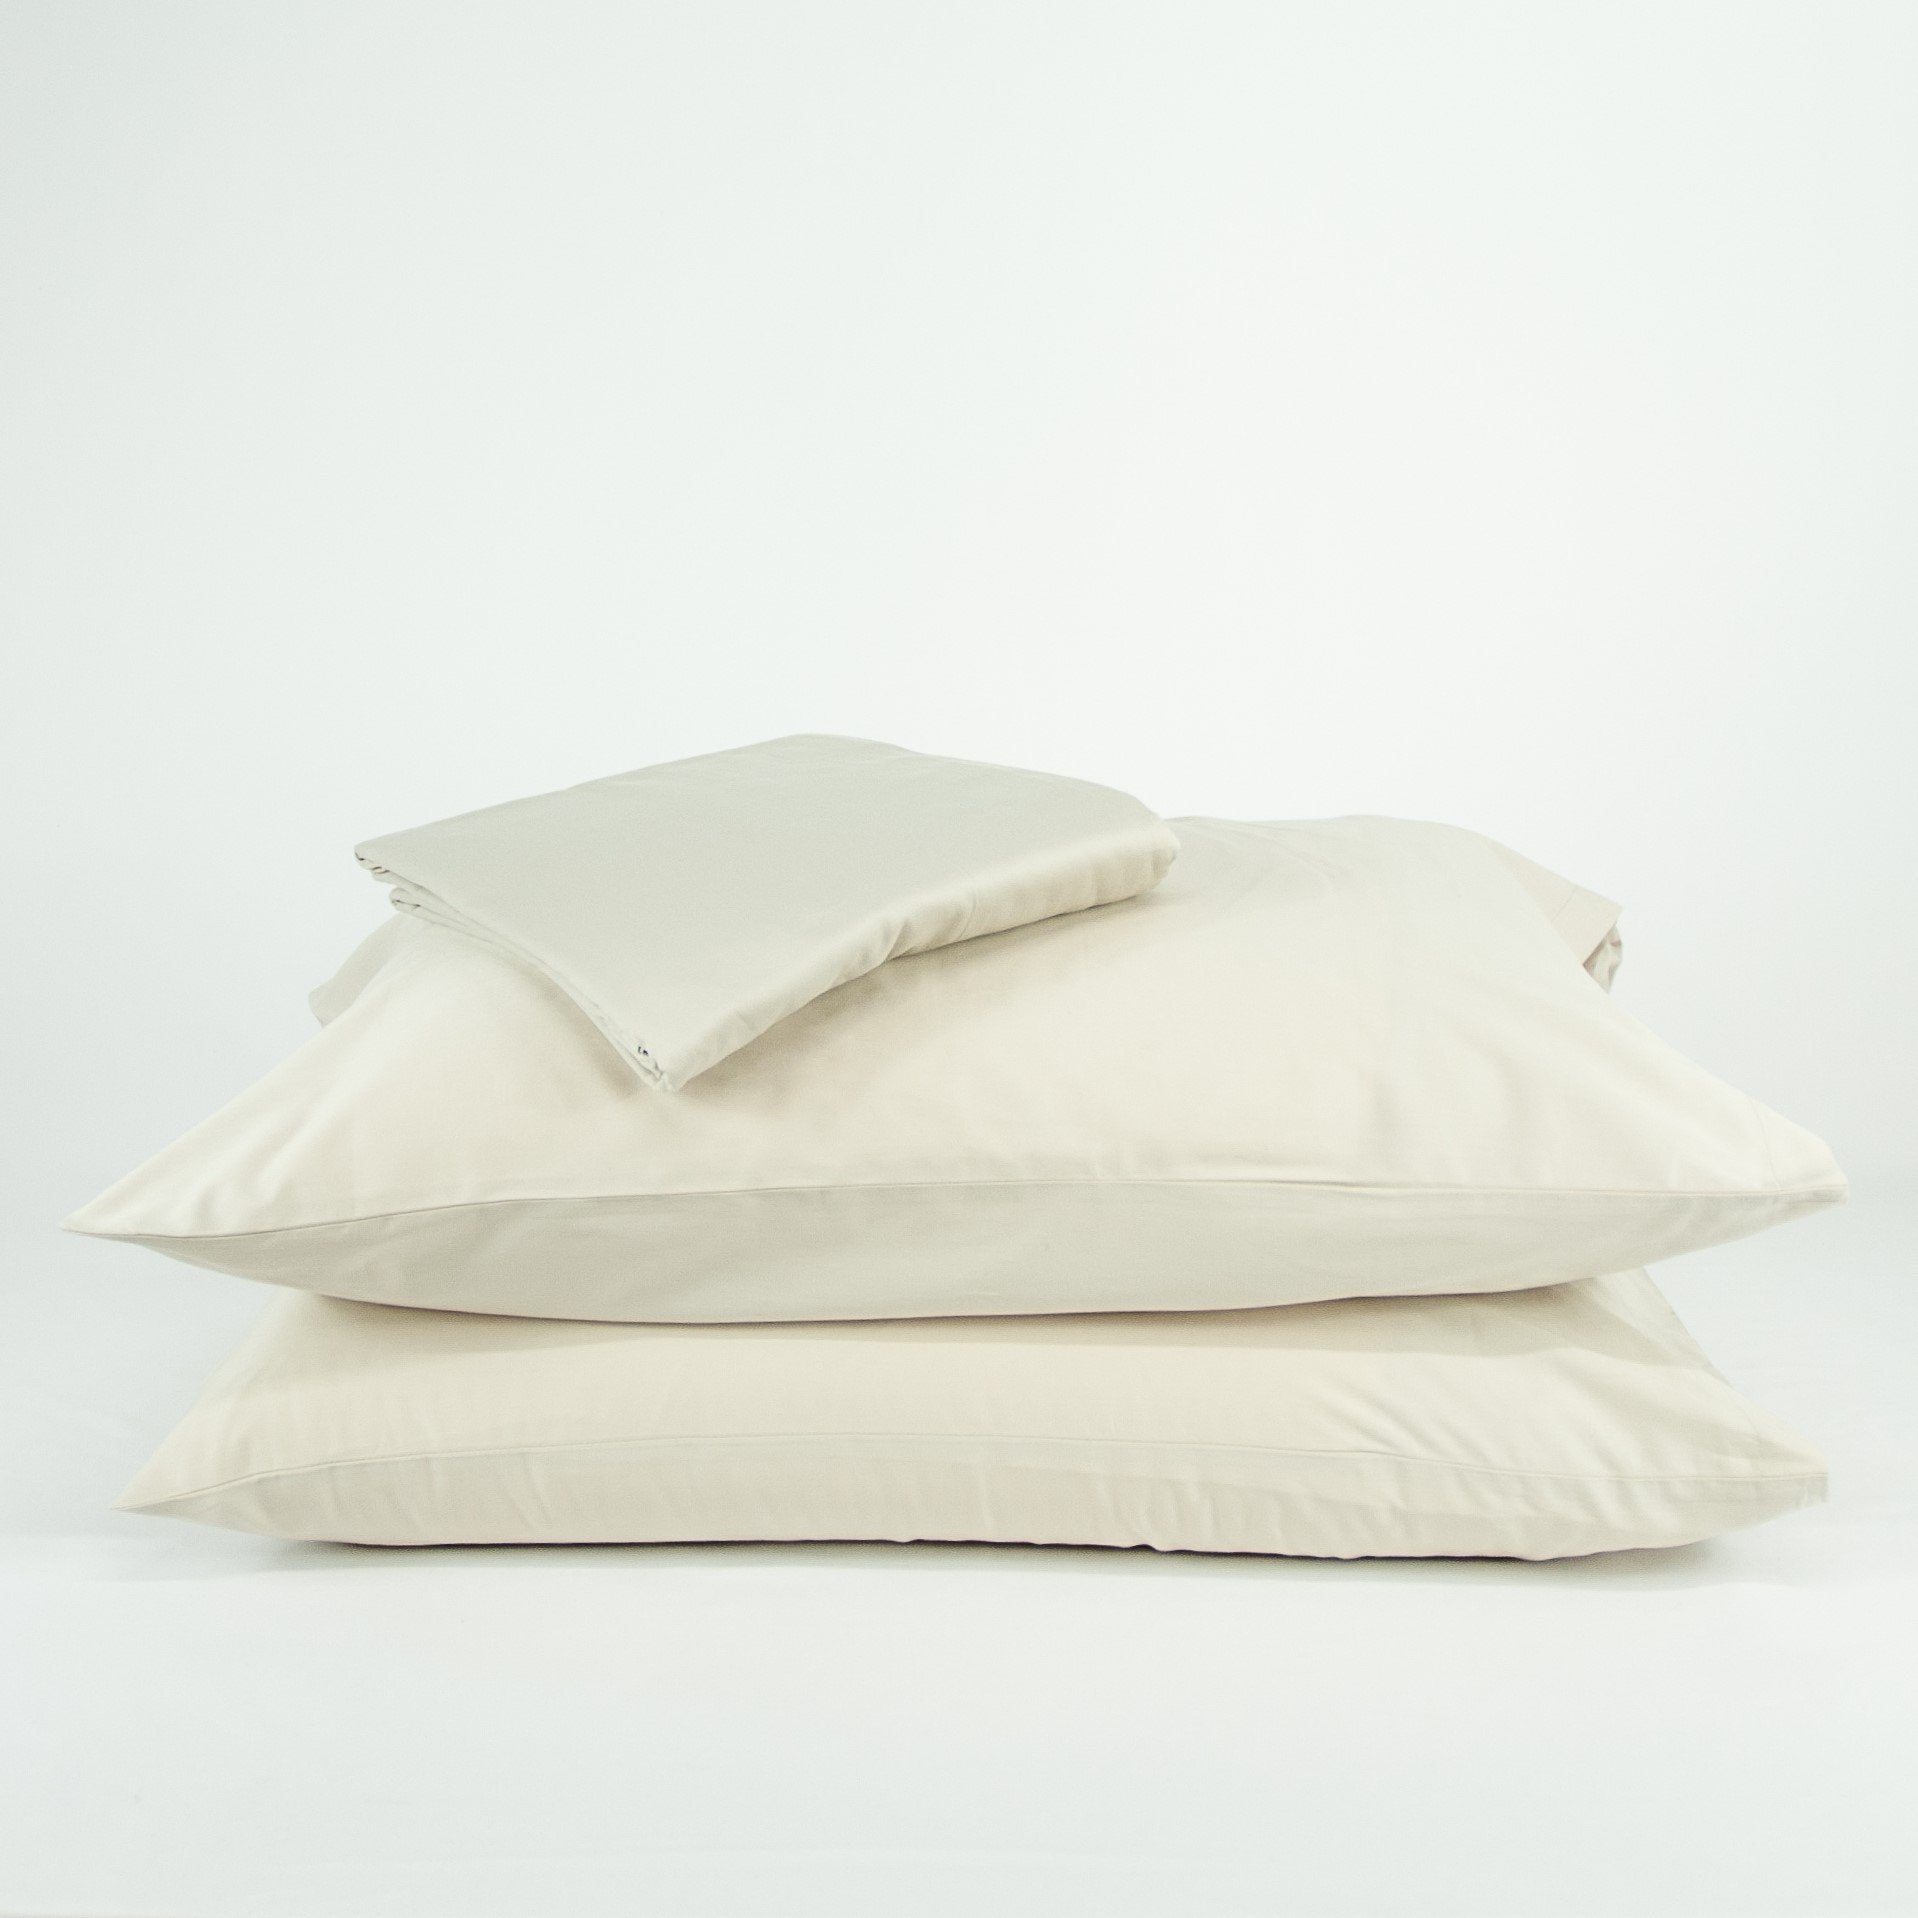 Stacked organic cotton pillowcases and sheets in egg shell white